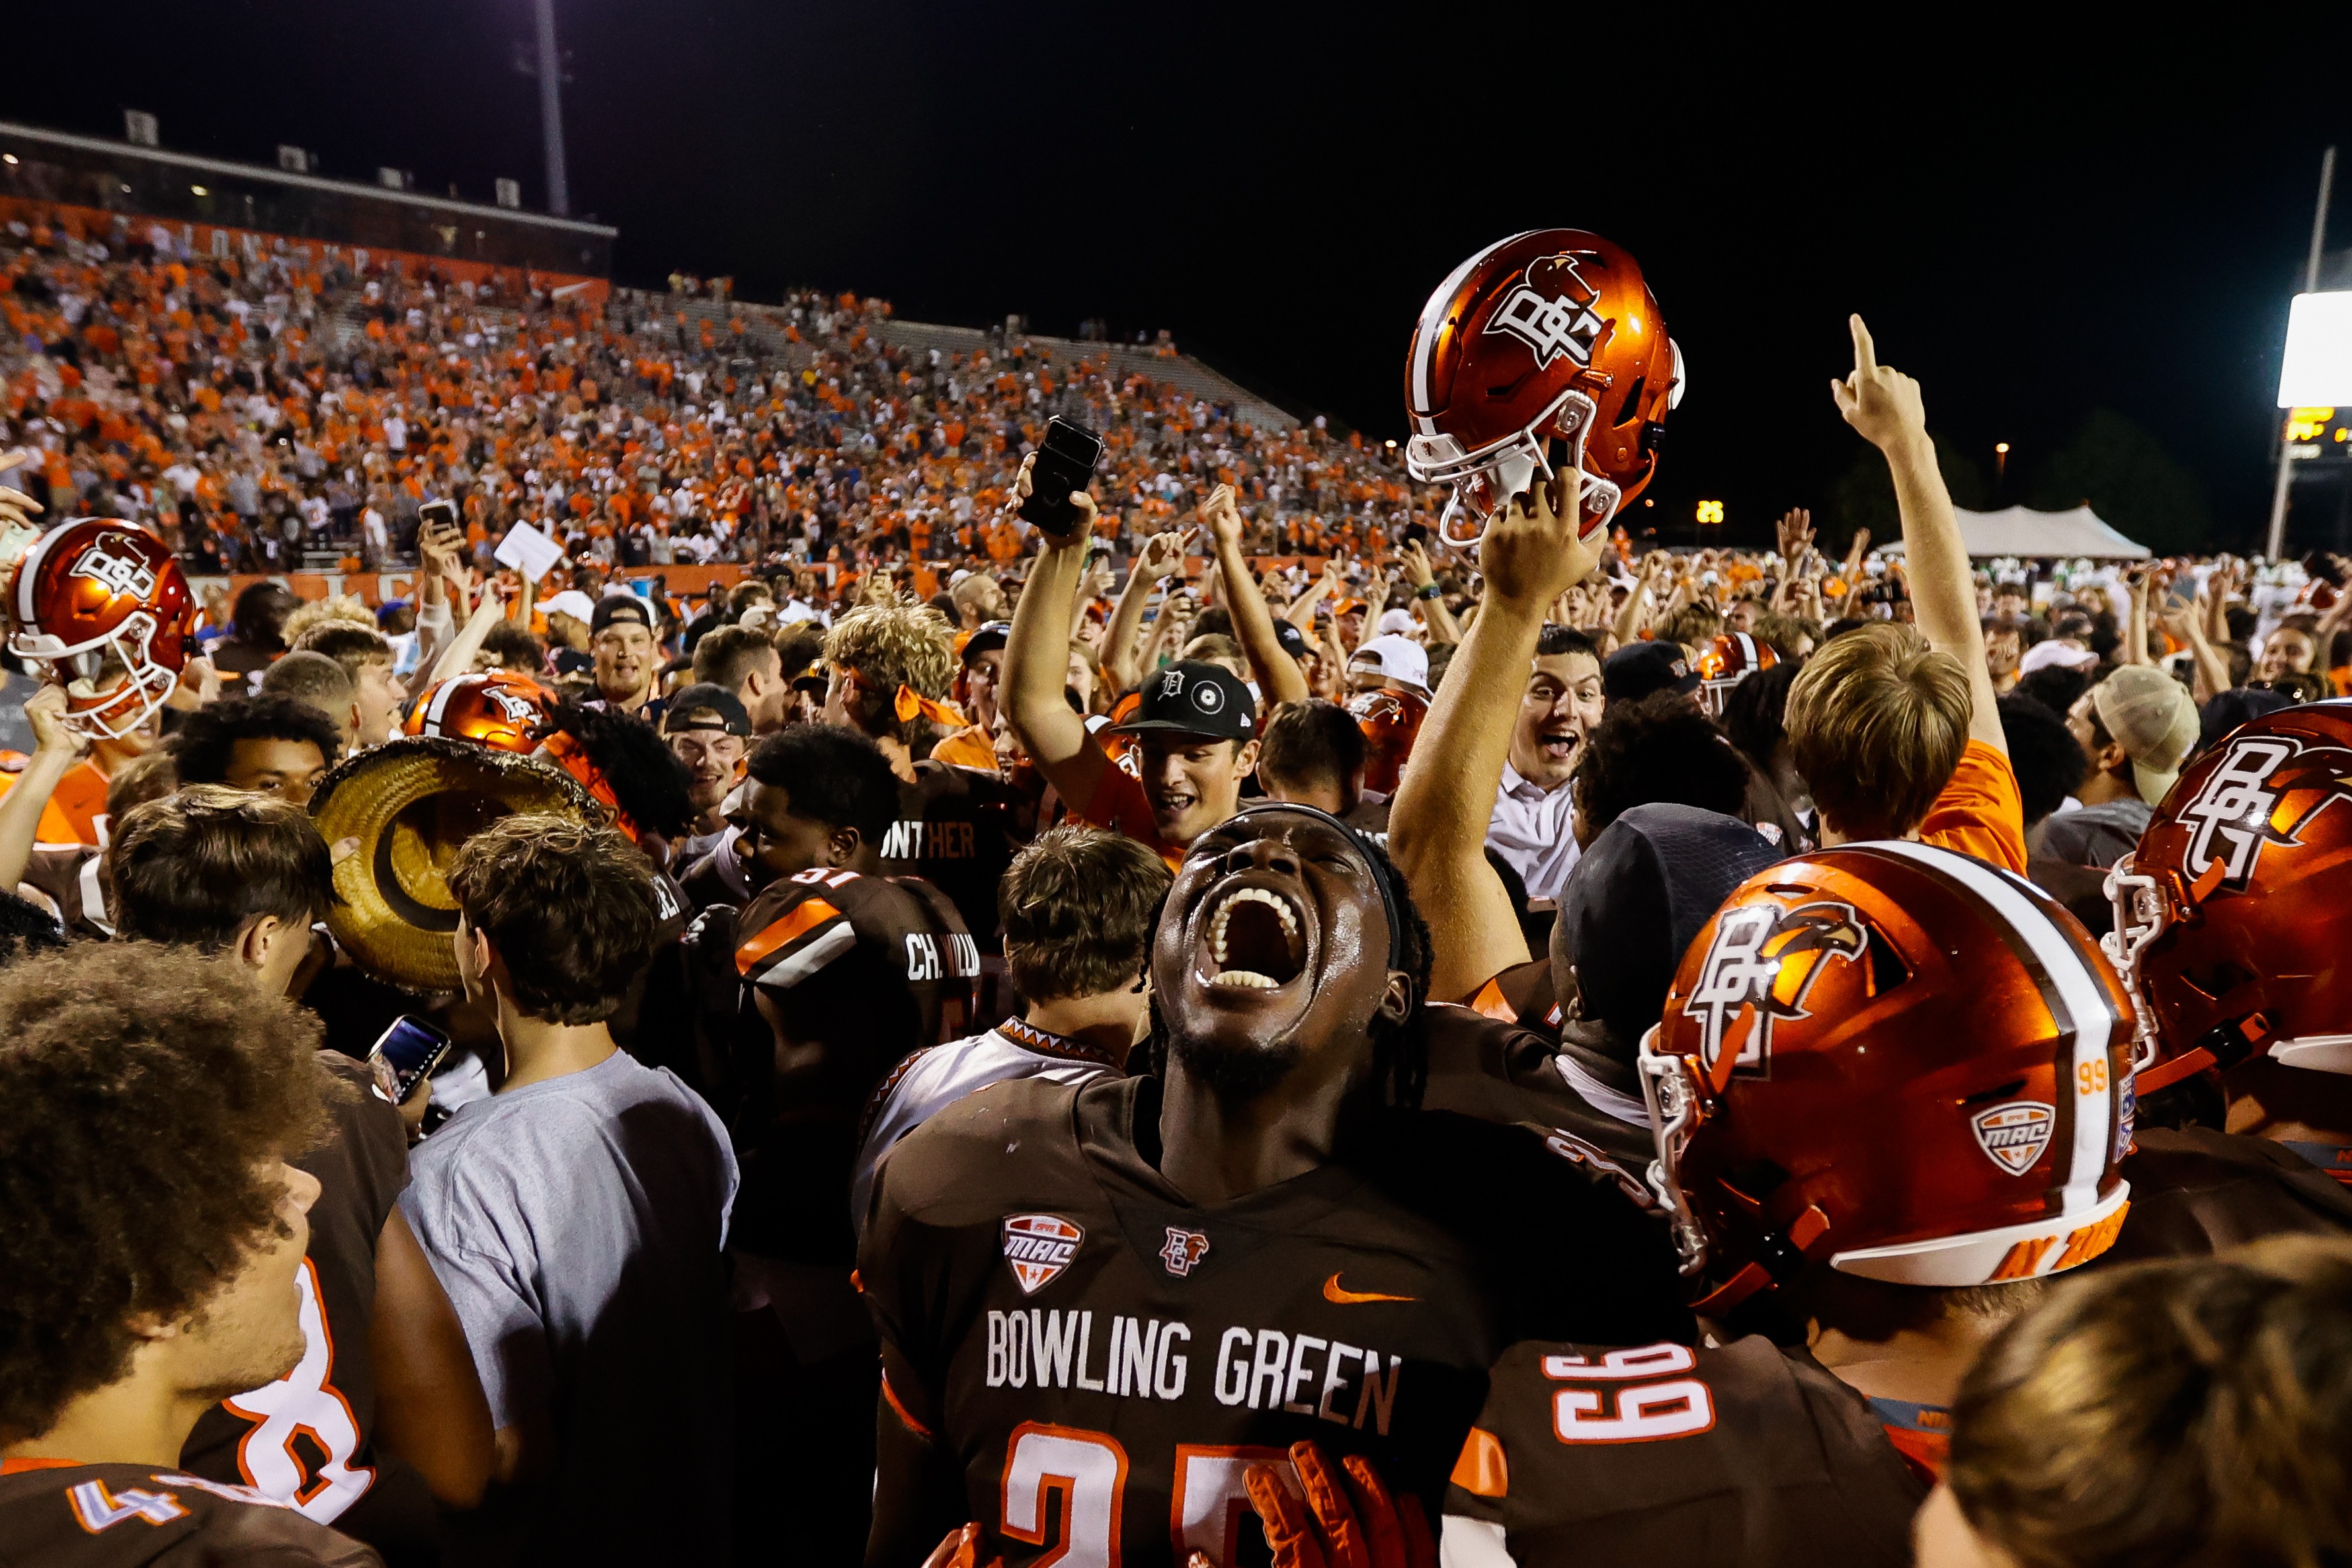 BGSU players and fans rejoice after stunning Marshall in overtime, 34-31.